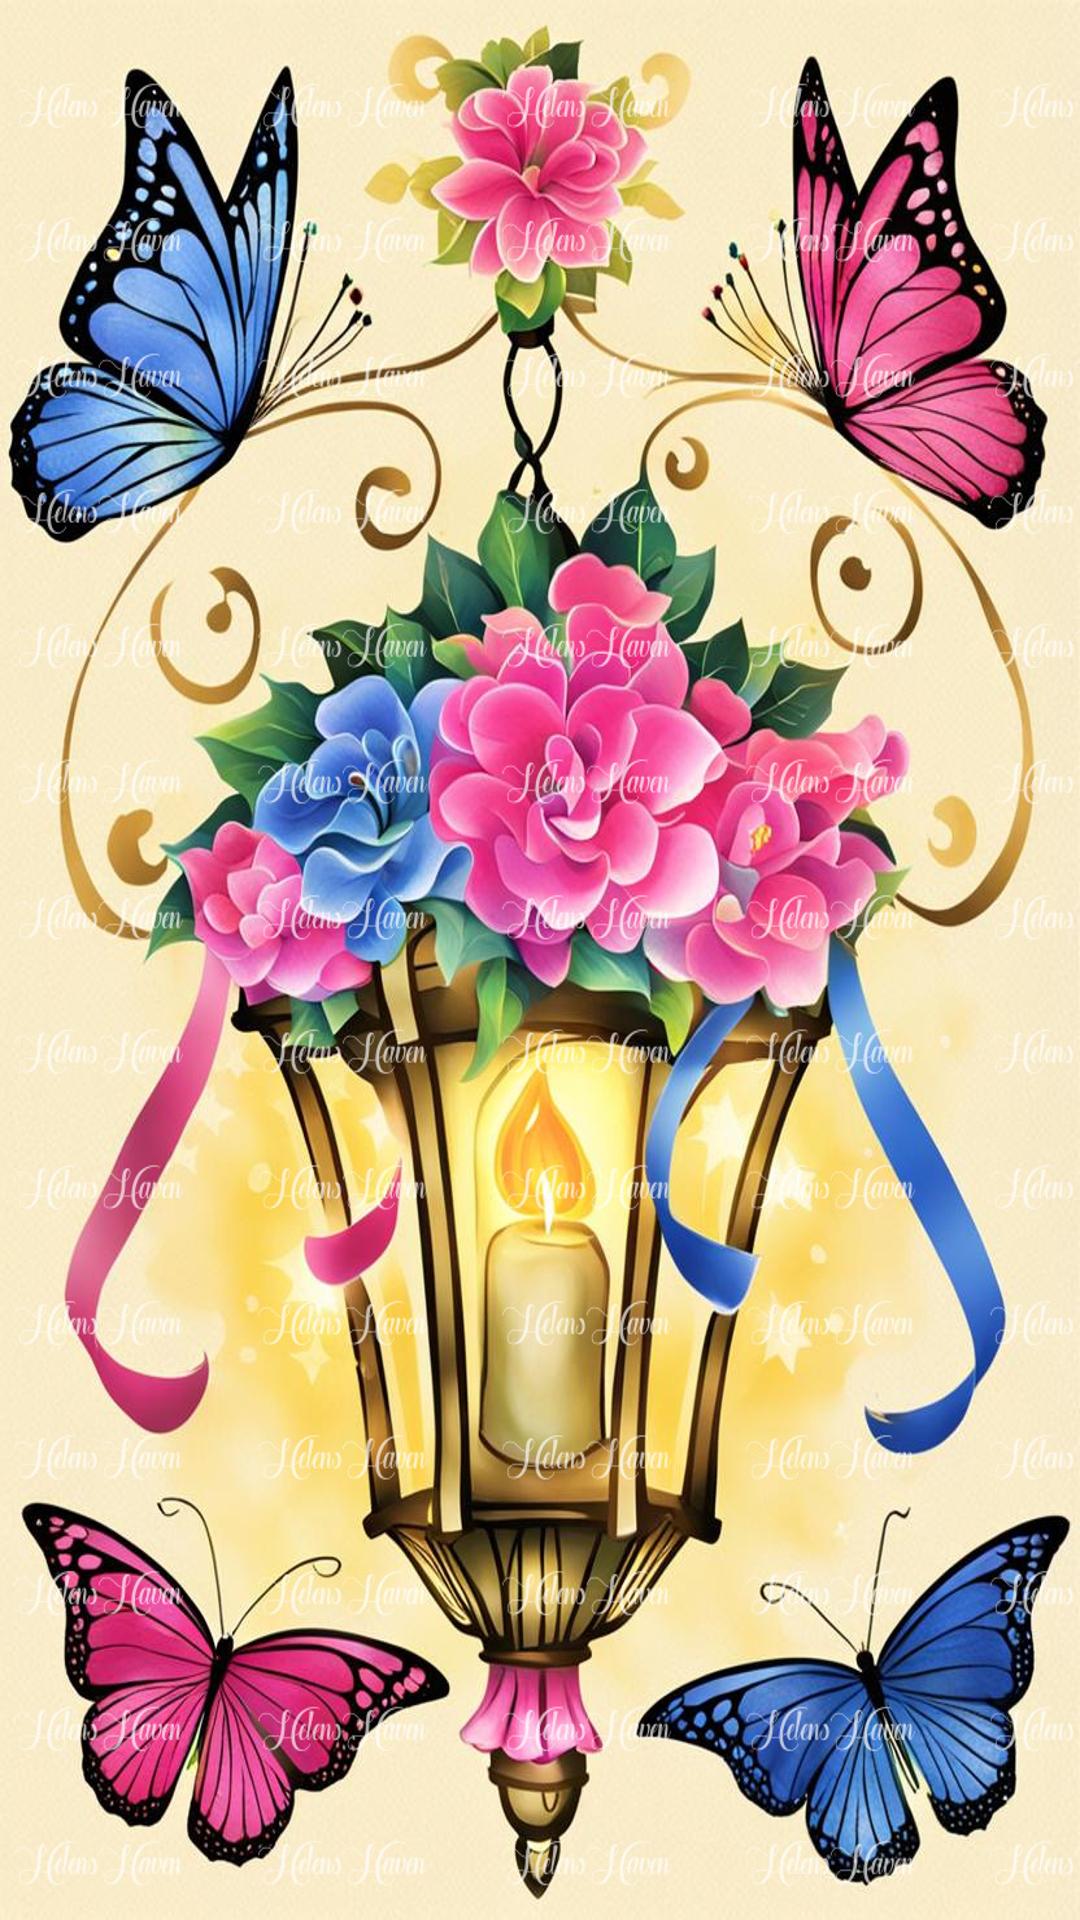 A lantern adorned with blue and pink flowers surrounded by blue and pink butterflies on a golden background